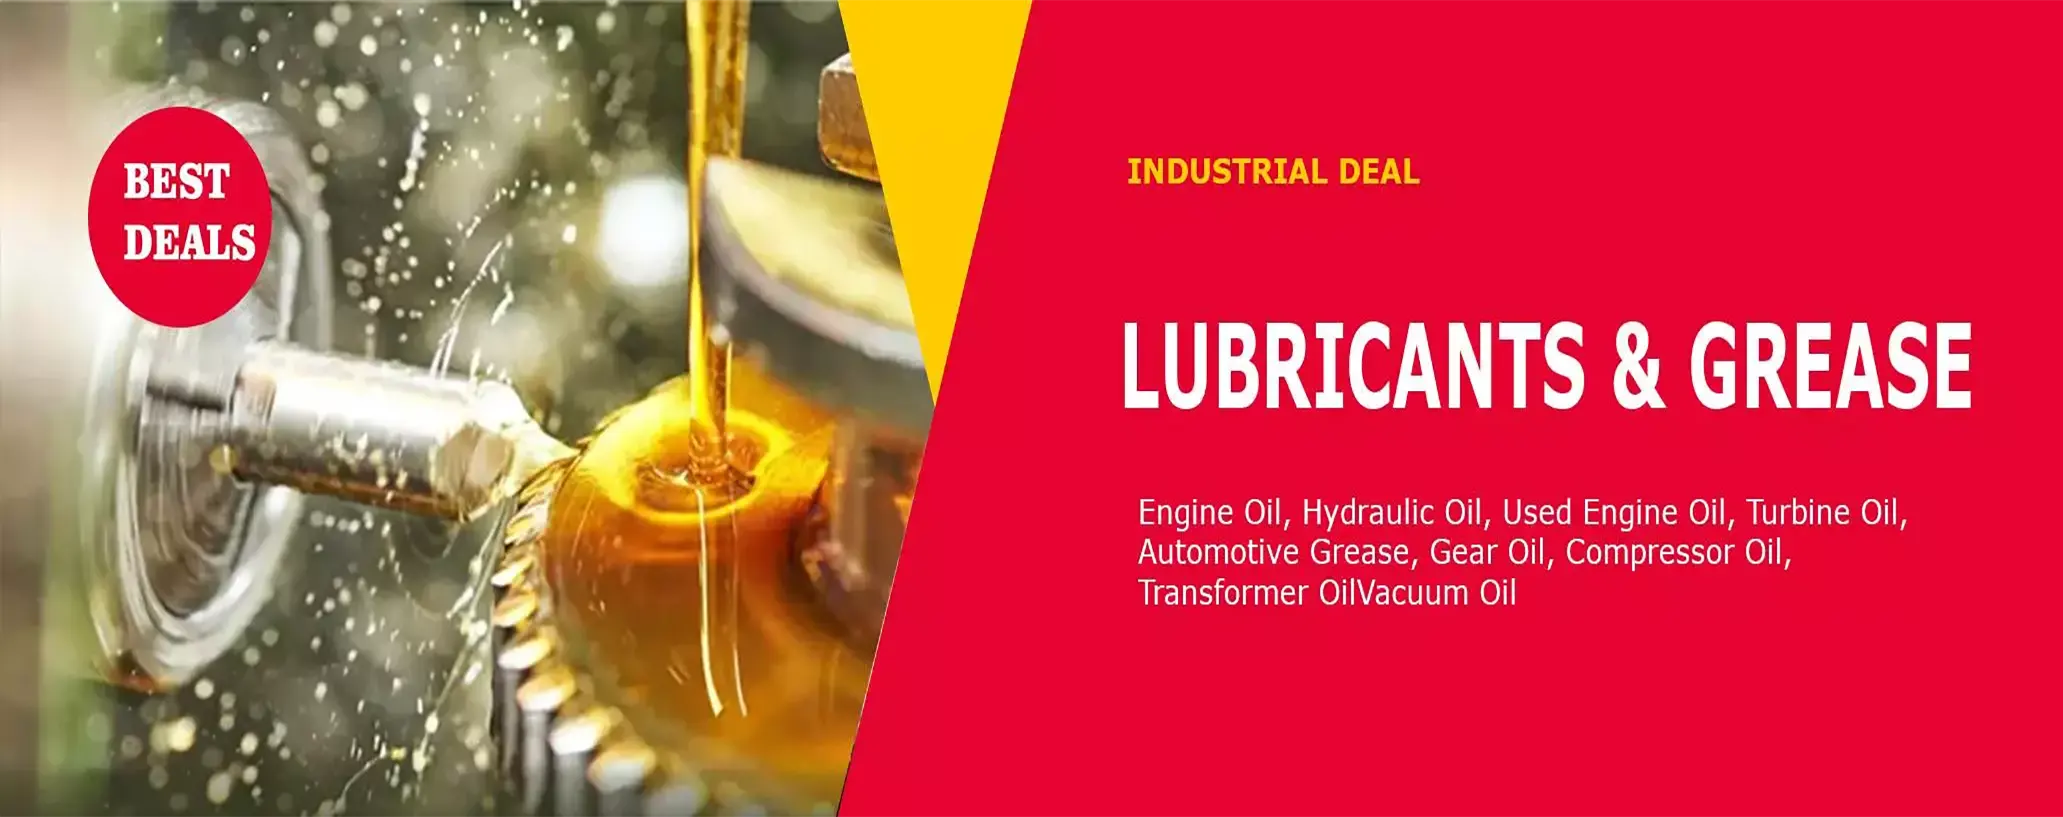 LUBRICANT GREASE